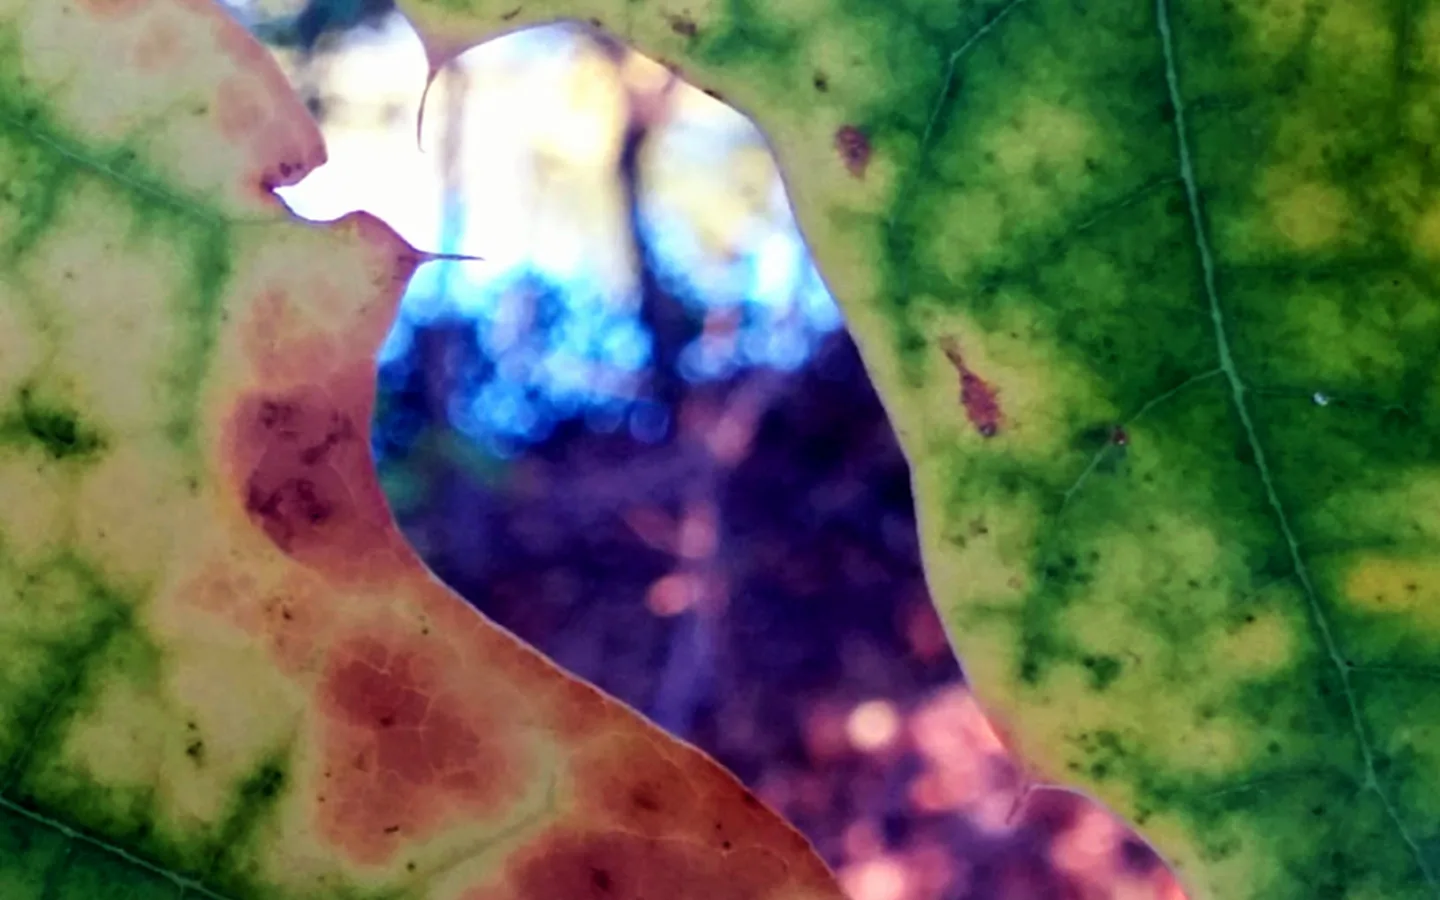 Abstract macro of portions of two Autumn leaves, with their curved edges side-by-side. The turning leaves have green, yellow and brown. Both leaf edges have a notch near the upper edge of the photo. The teardrop shaped gap between the leaves, wider near the top, is in the the center of the photo, spanning the height, with its axis about 45° from the vertical. What is visible in the gap is out of focus, as if there were a temporal rift between the leaves, hence the name.